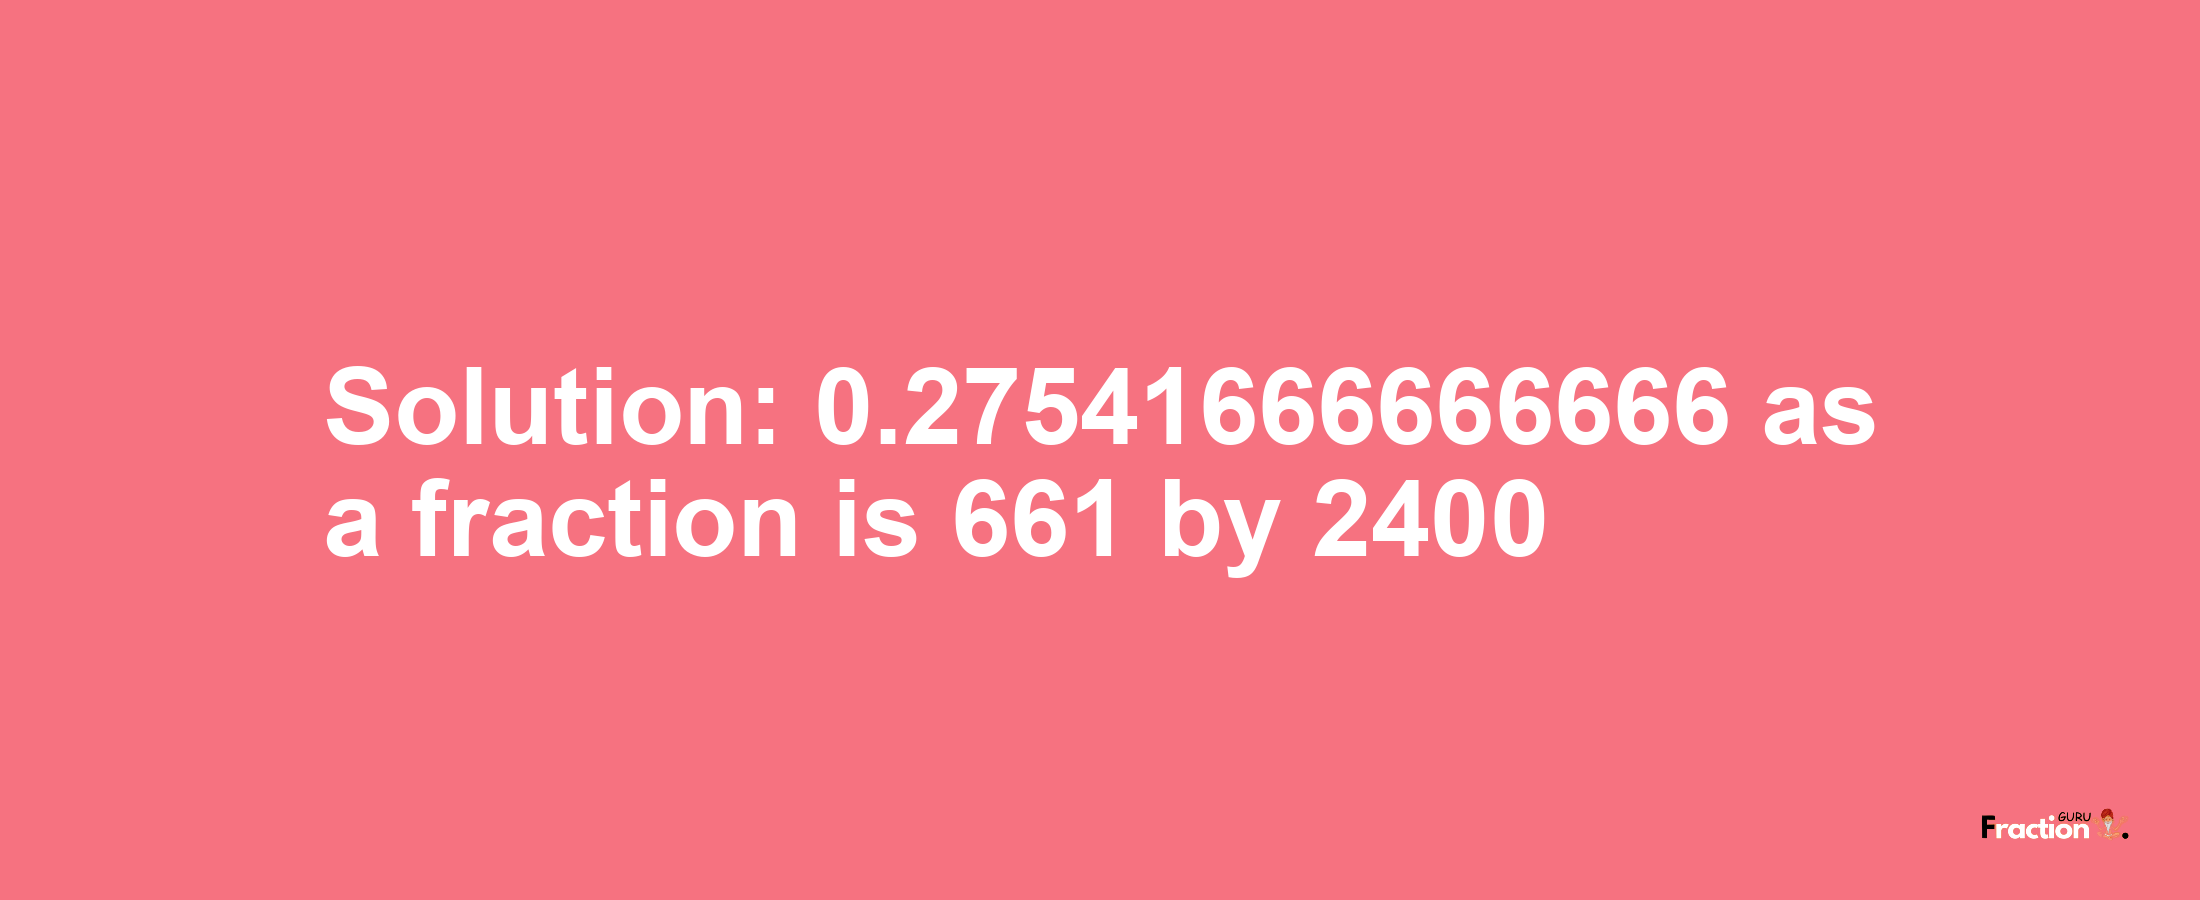 Solution:0.27541666666666 as a fraction is 661/2400